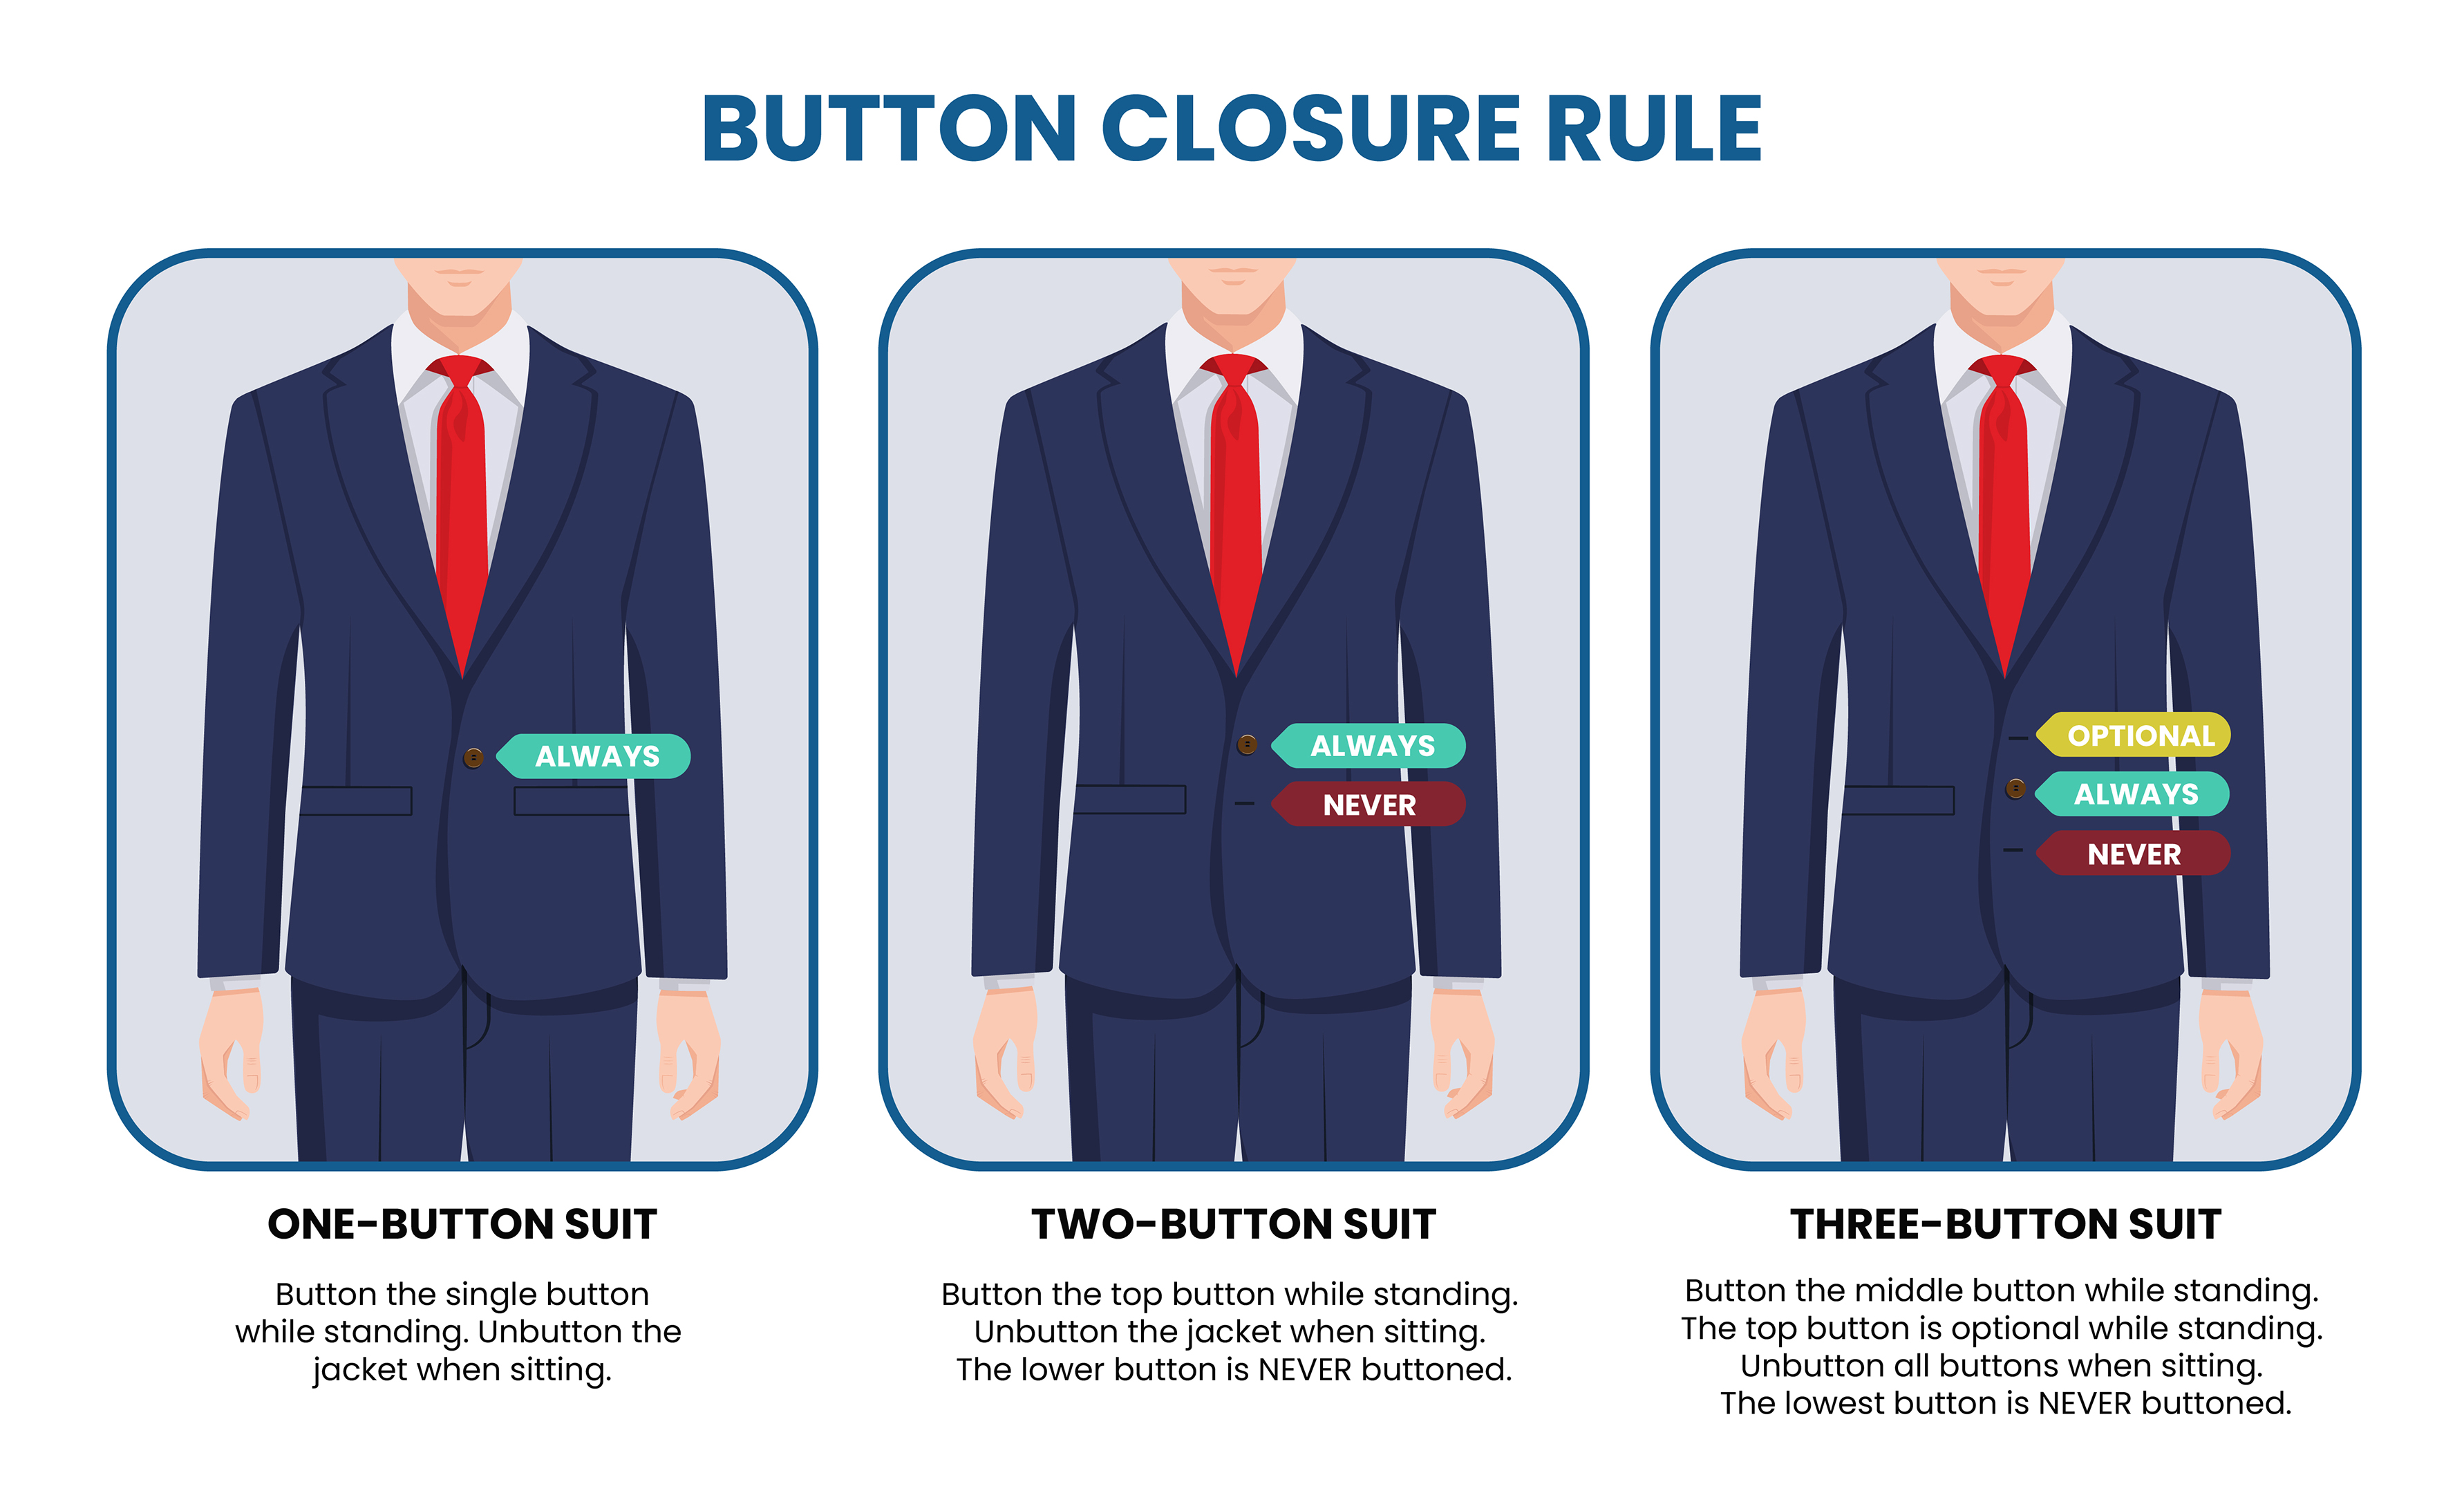 one vs. two vs. three button suits & which suit buttons to open/close